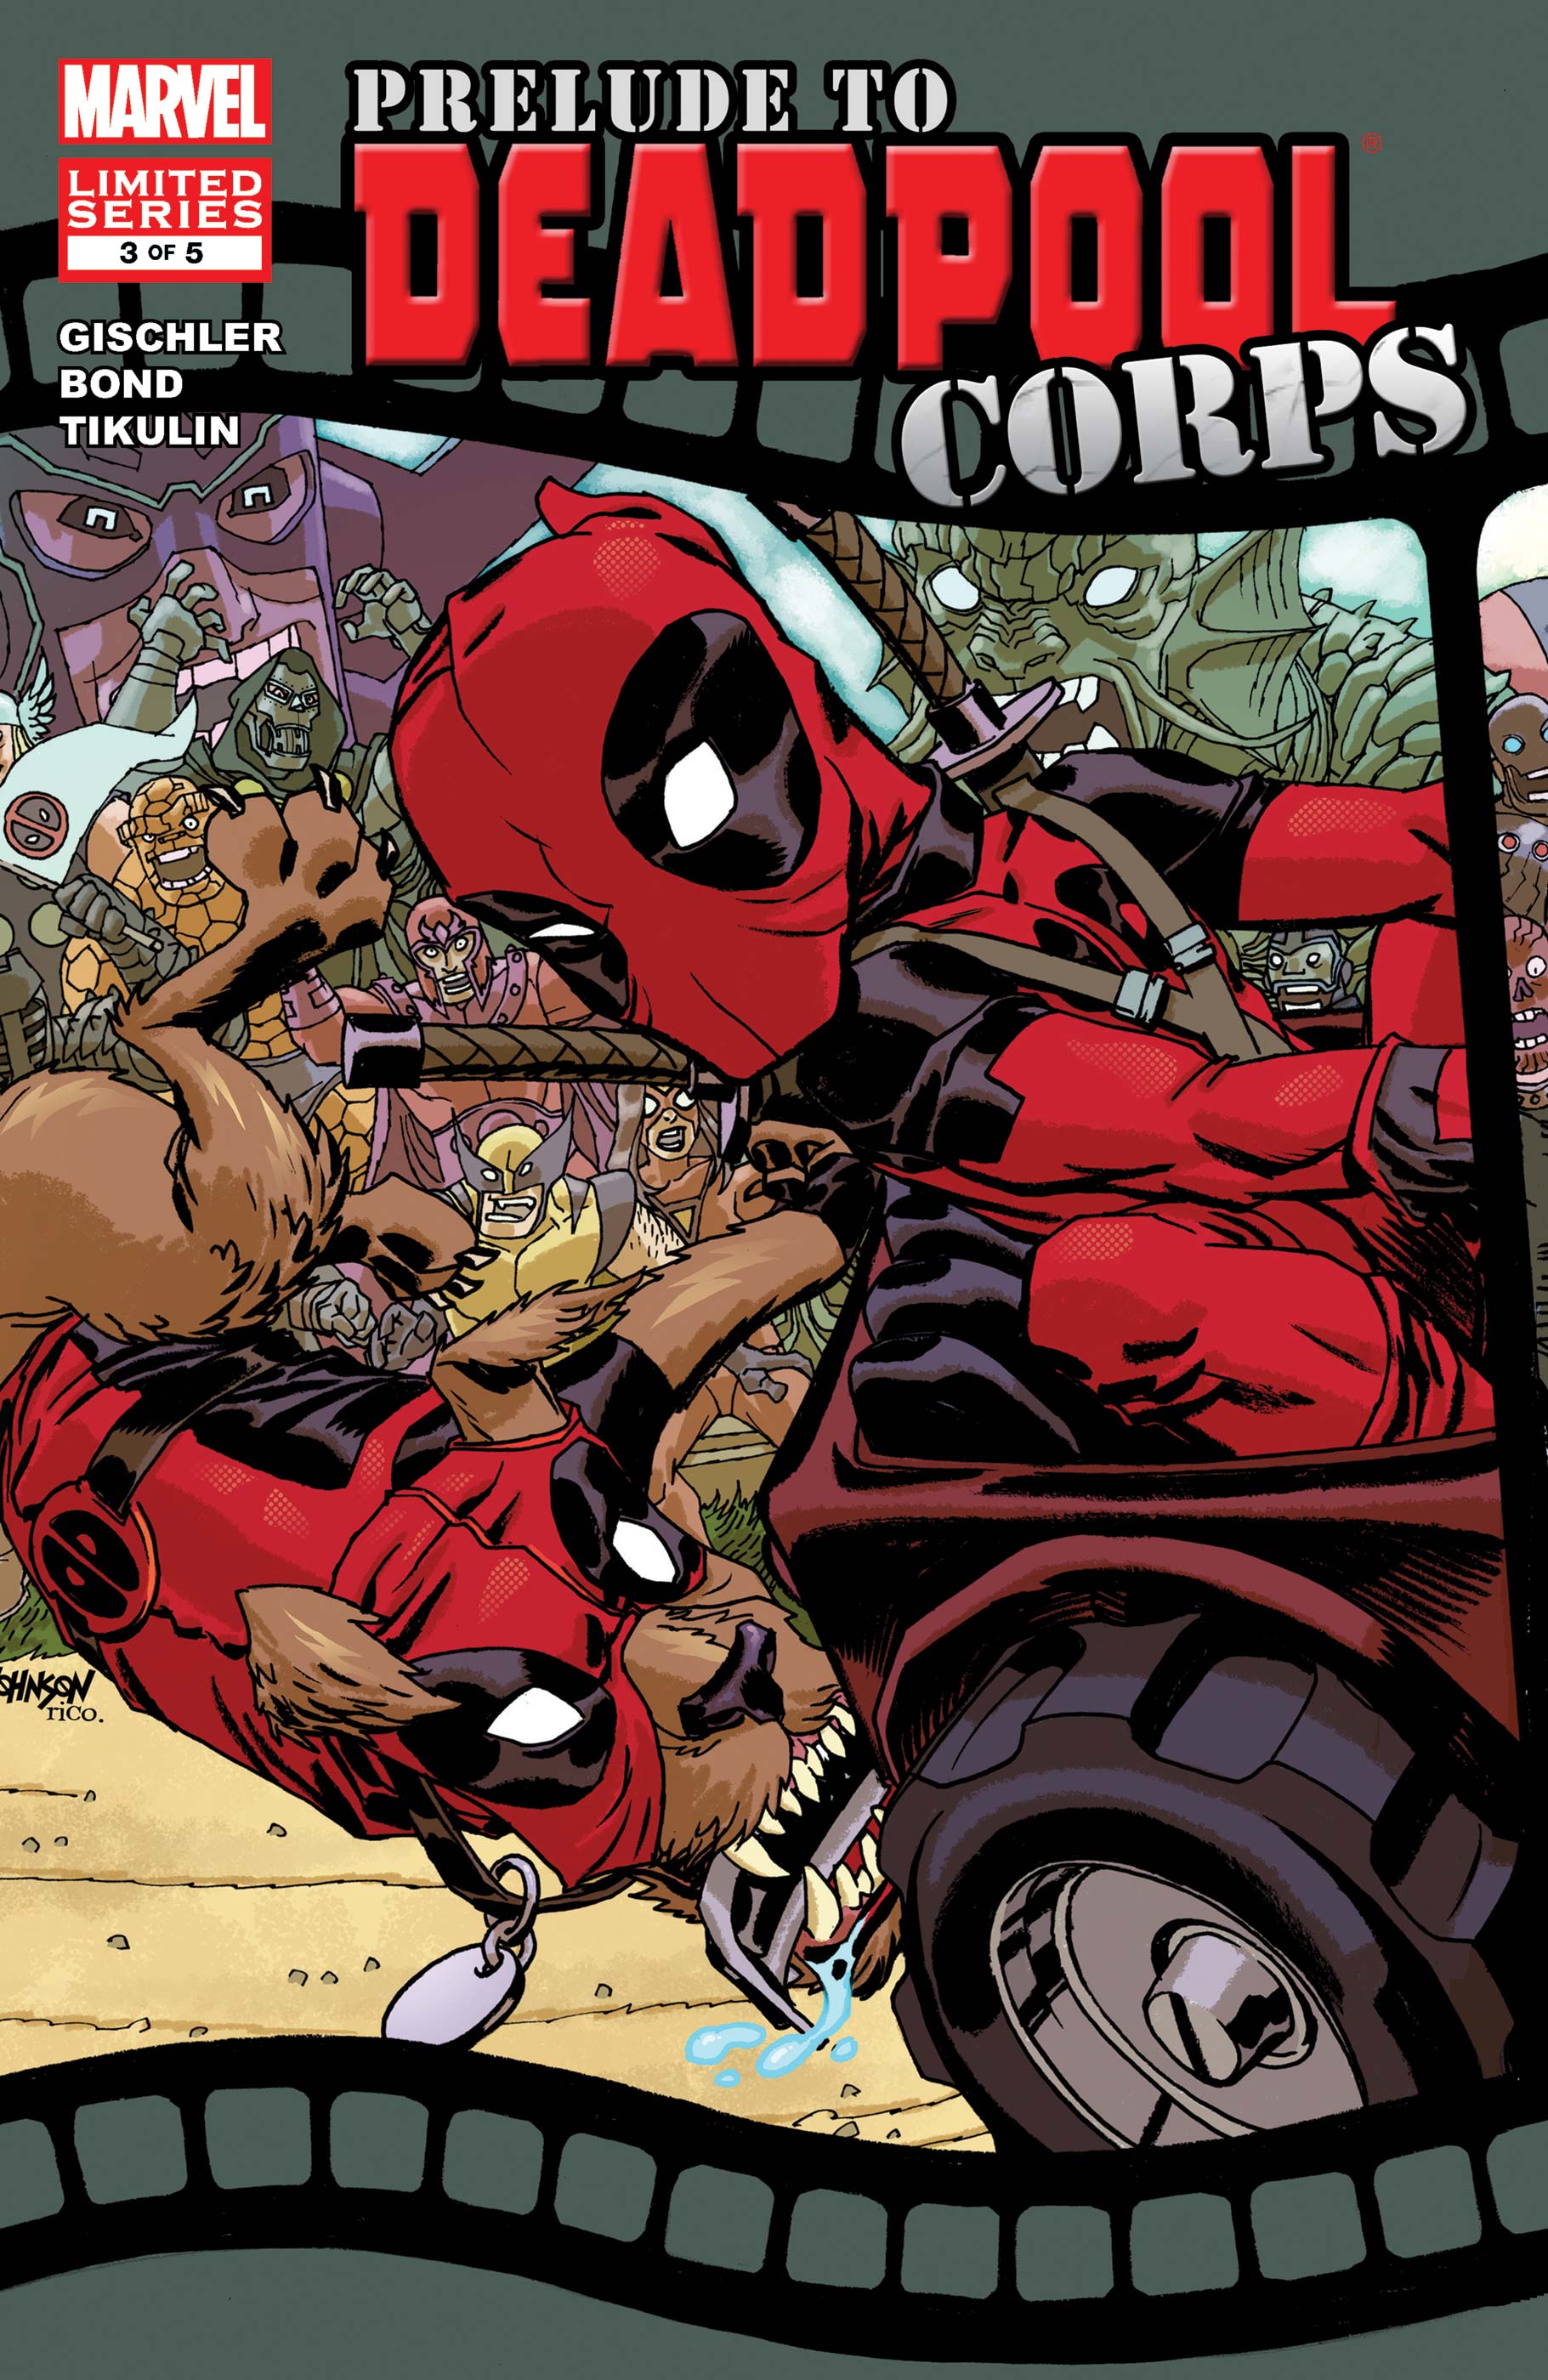 Prelude to Deadpool Corps (2010) #3